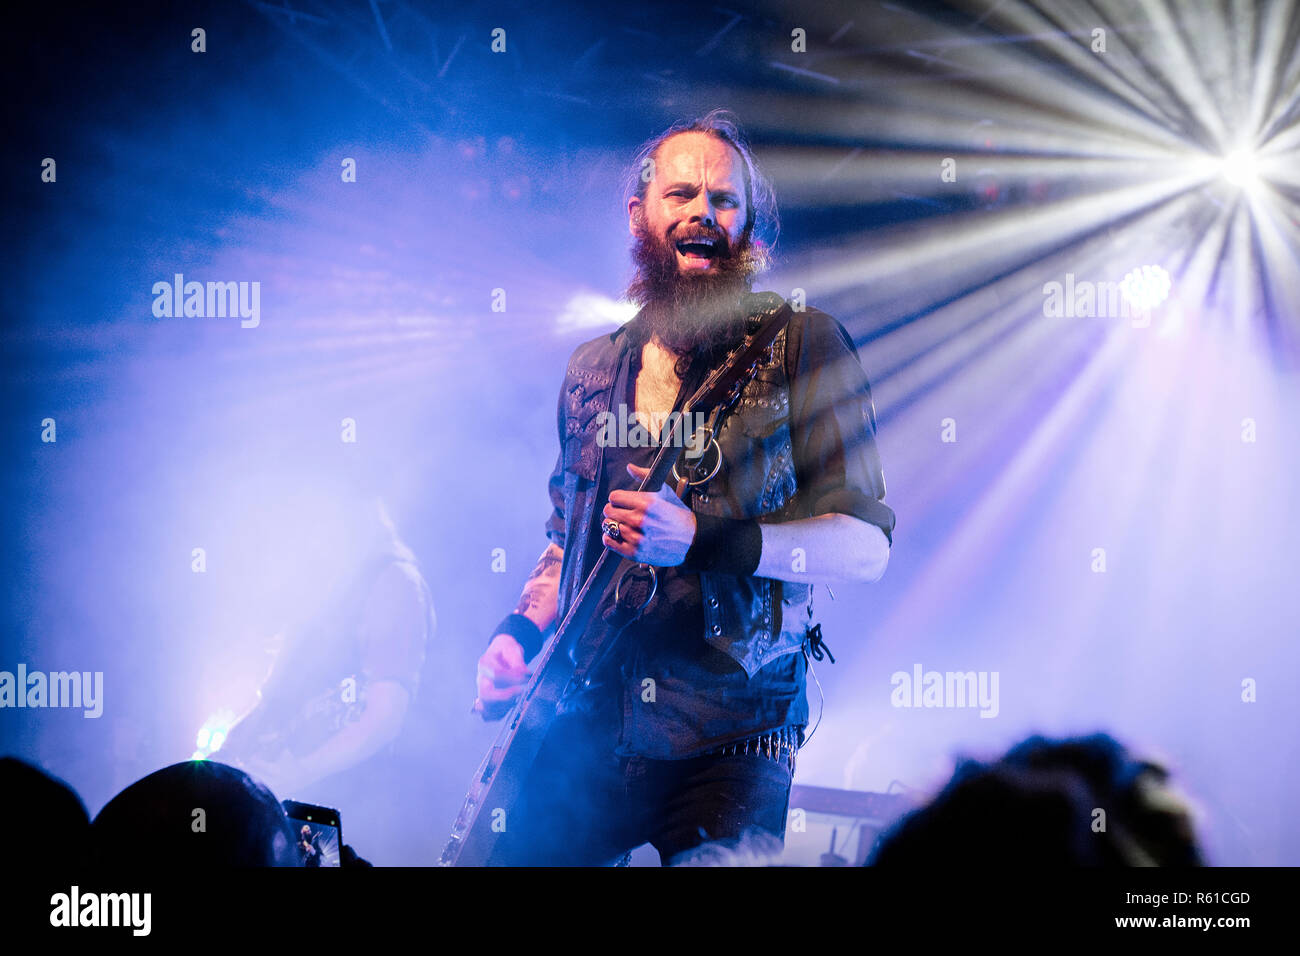 Norway, Oslo - November 30, 2018. The Icelandic heavy metal band Sólstafir performs a live concert at Vulkan Arena in Oslo. Here vocalist and guitarist Addi Tryggvason is seen live on stage. (Photo credit: Gonzales Photo - Terje Dokken). Stock Photo